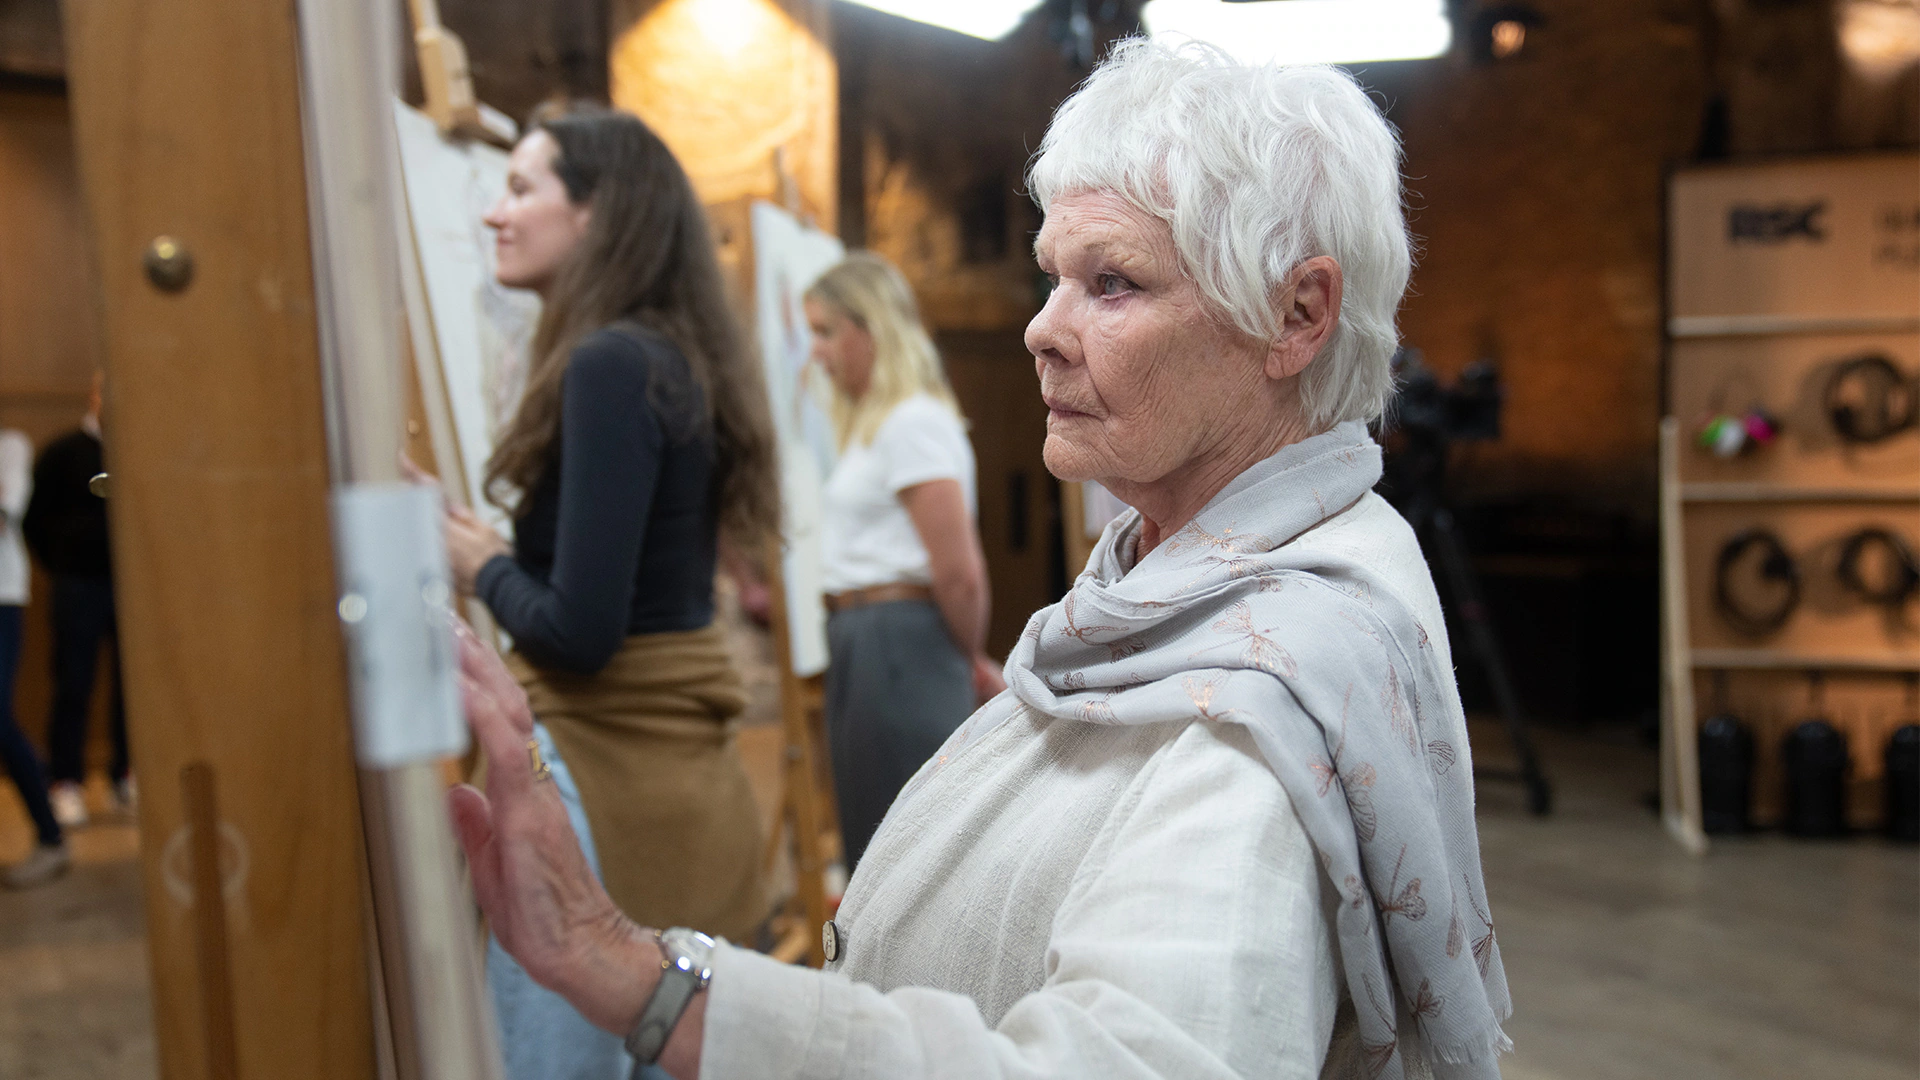 Sky Arts celebrates a decade of Portrait Artist of the Year with Dame Judi Dench